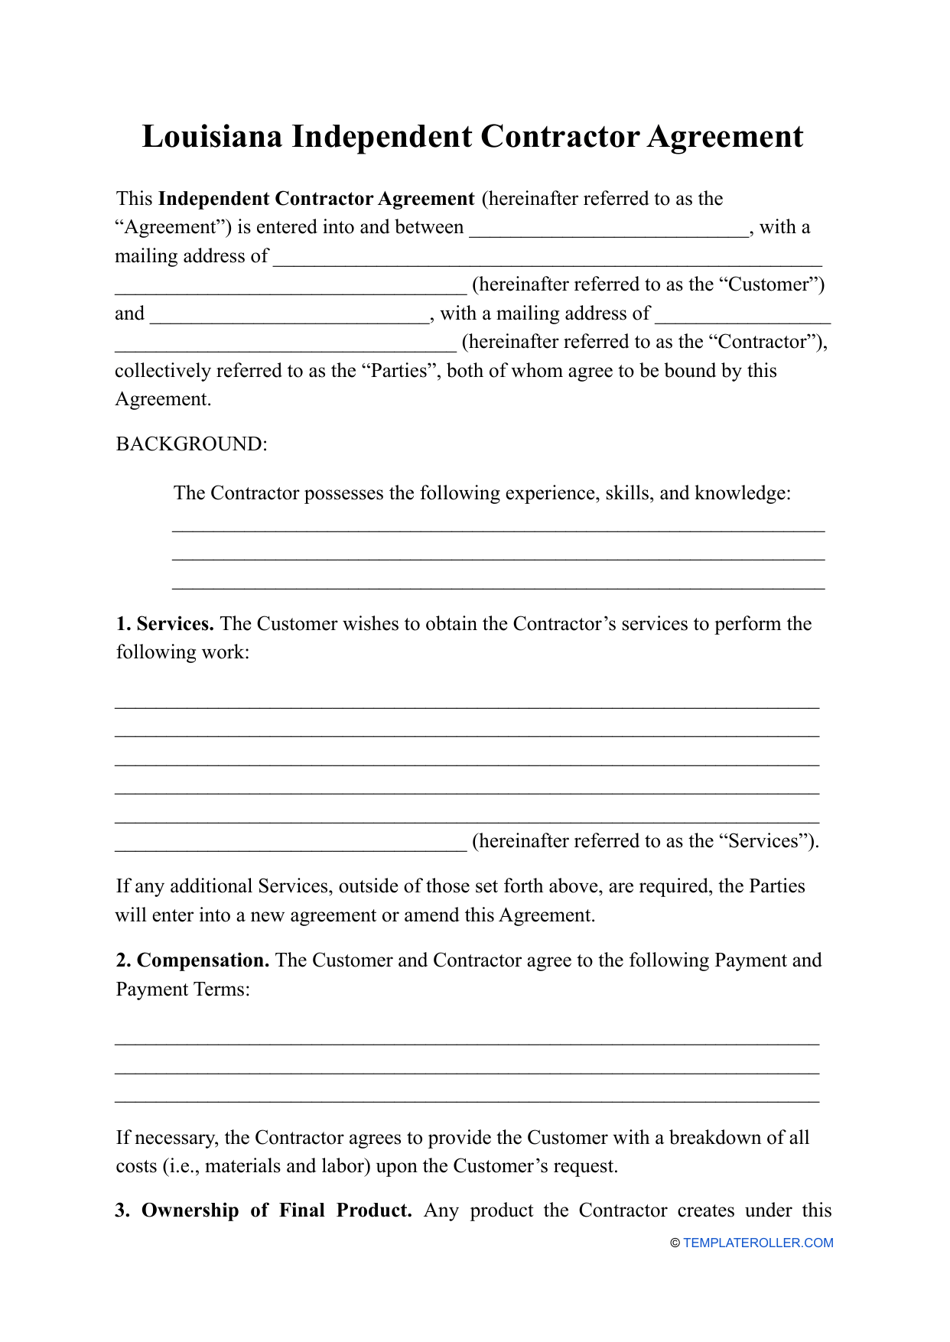 Independent Contractor Agreement Template - Louisiana, Page 1